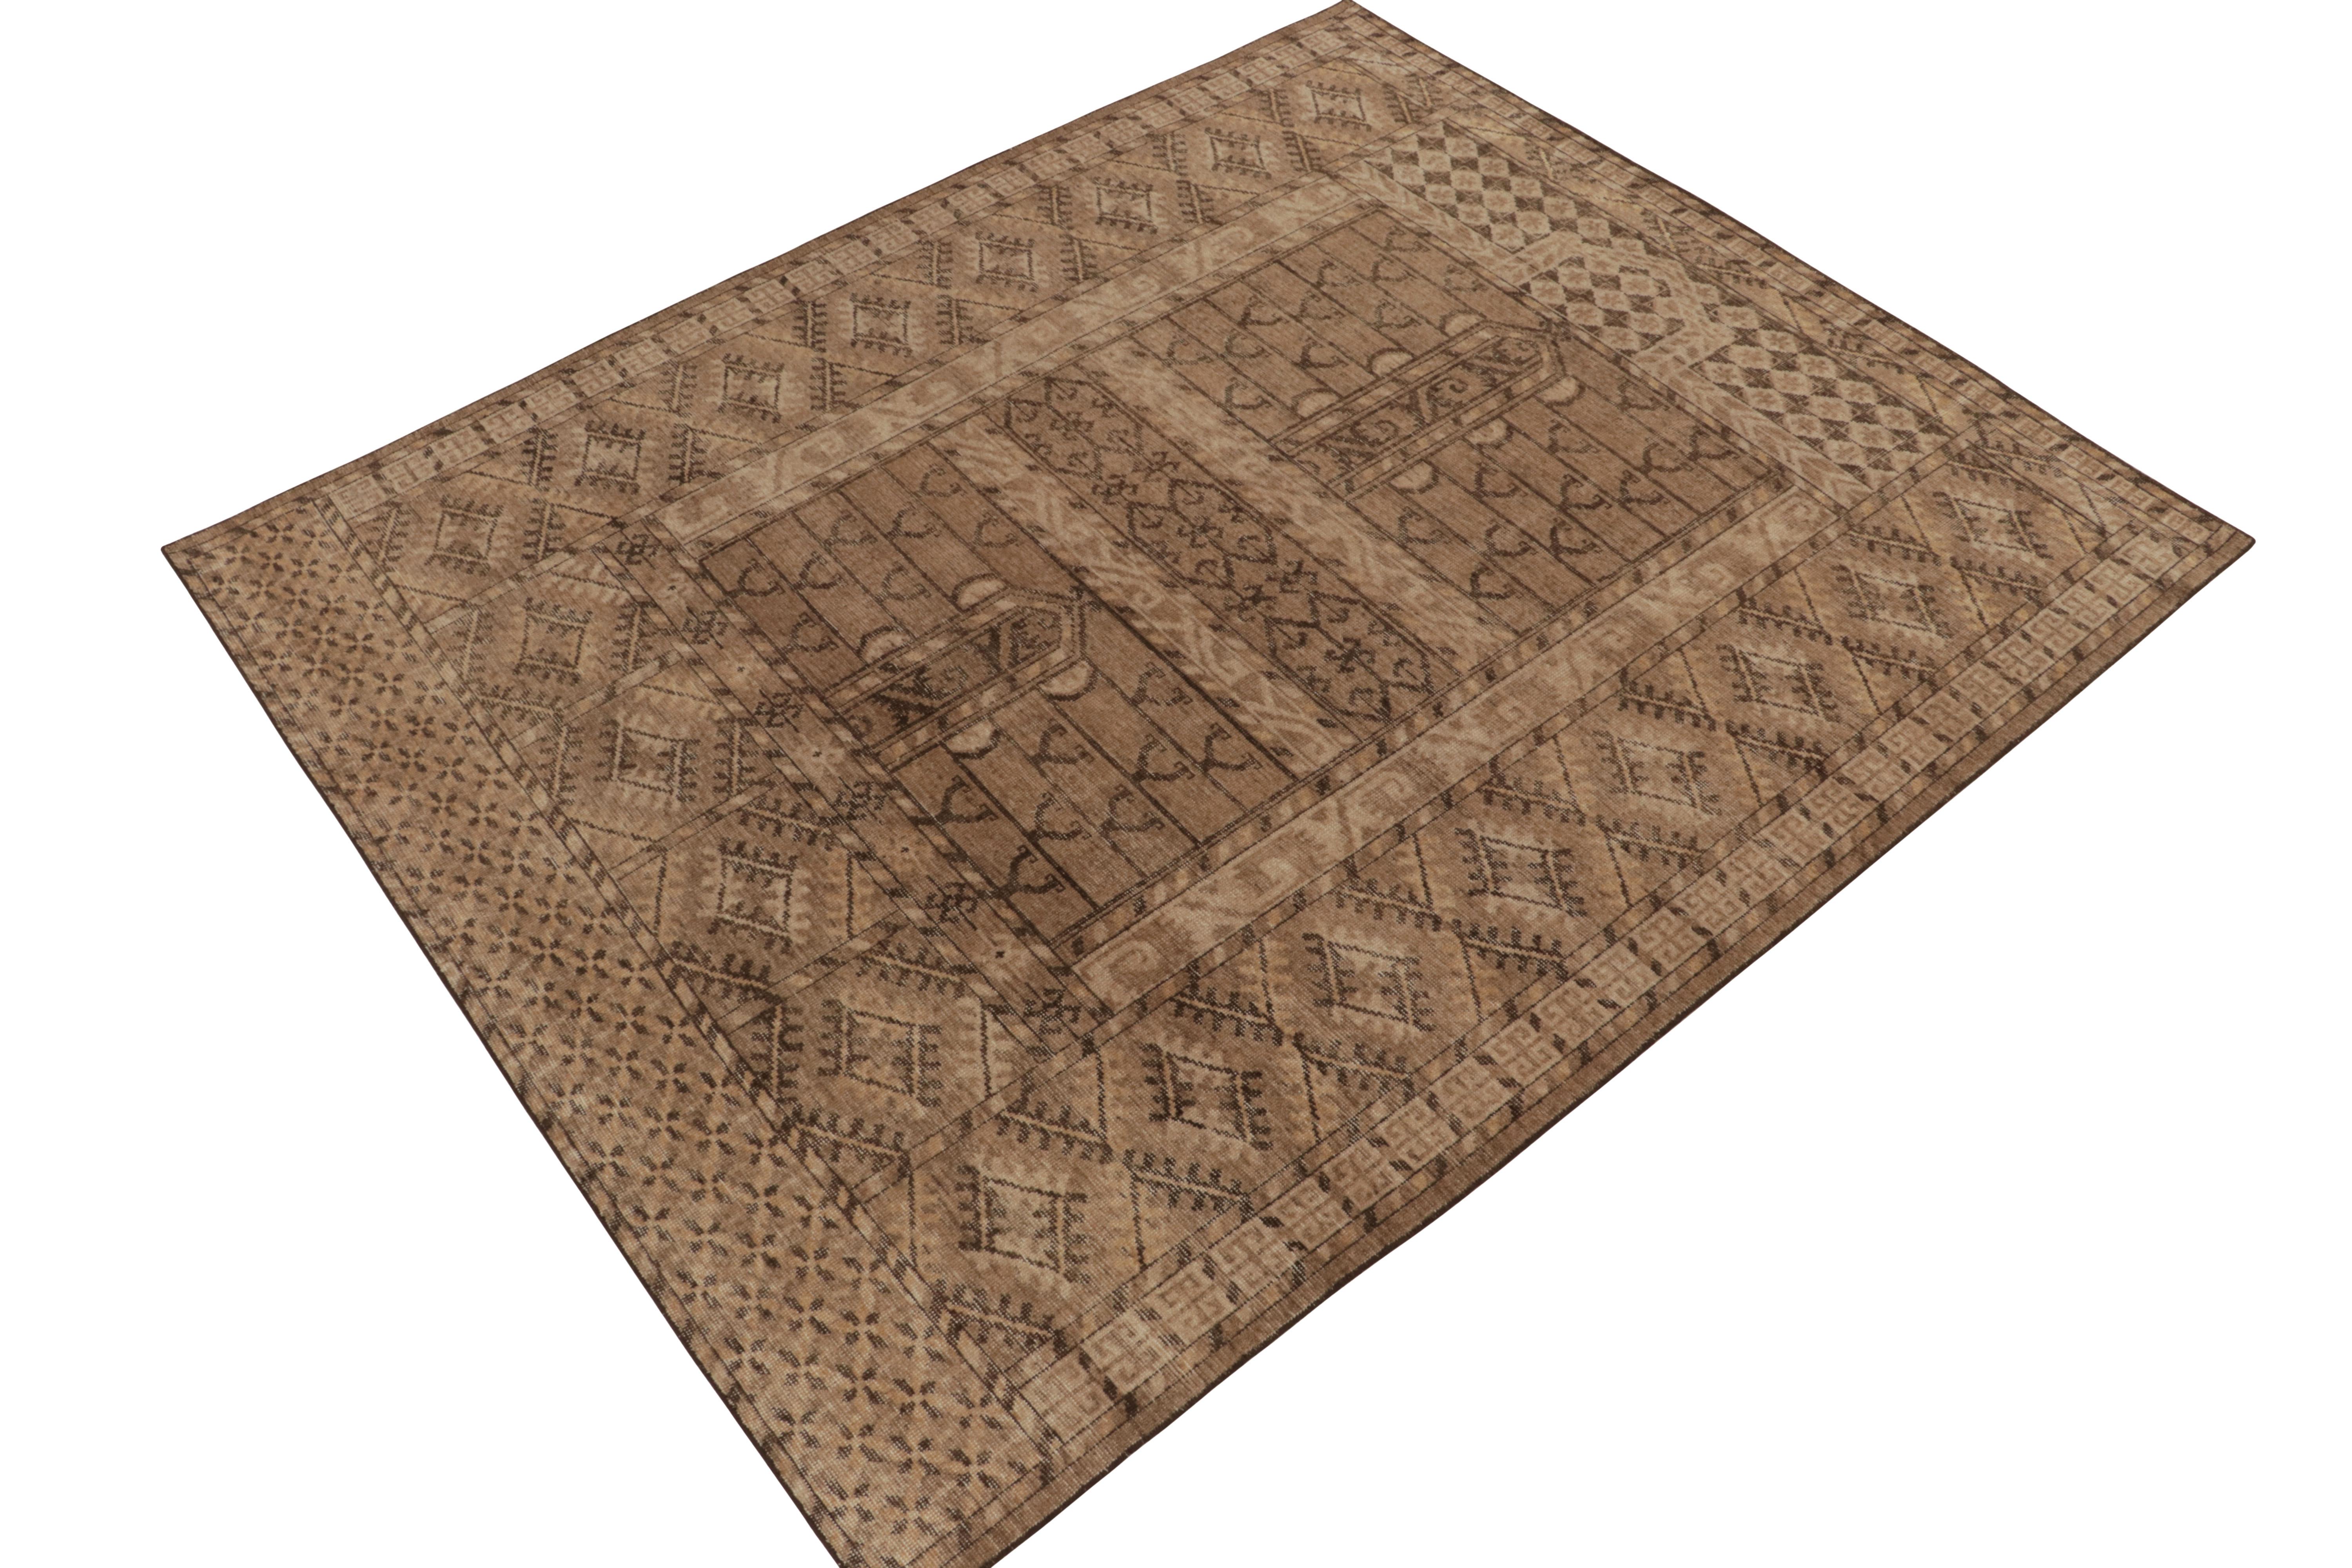 An 8x10 hand-knotted wool rug from Rug & Kilim’s Homage Collection. 

This creation recaptures tribal aesthetics in a modern fashion with soft tones of beige & brown naturally complementing the tribal geometry. This time-honored look of symmetry and